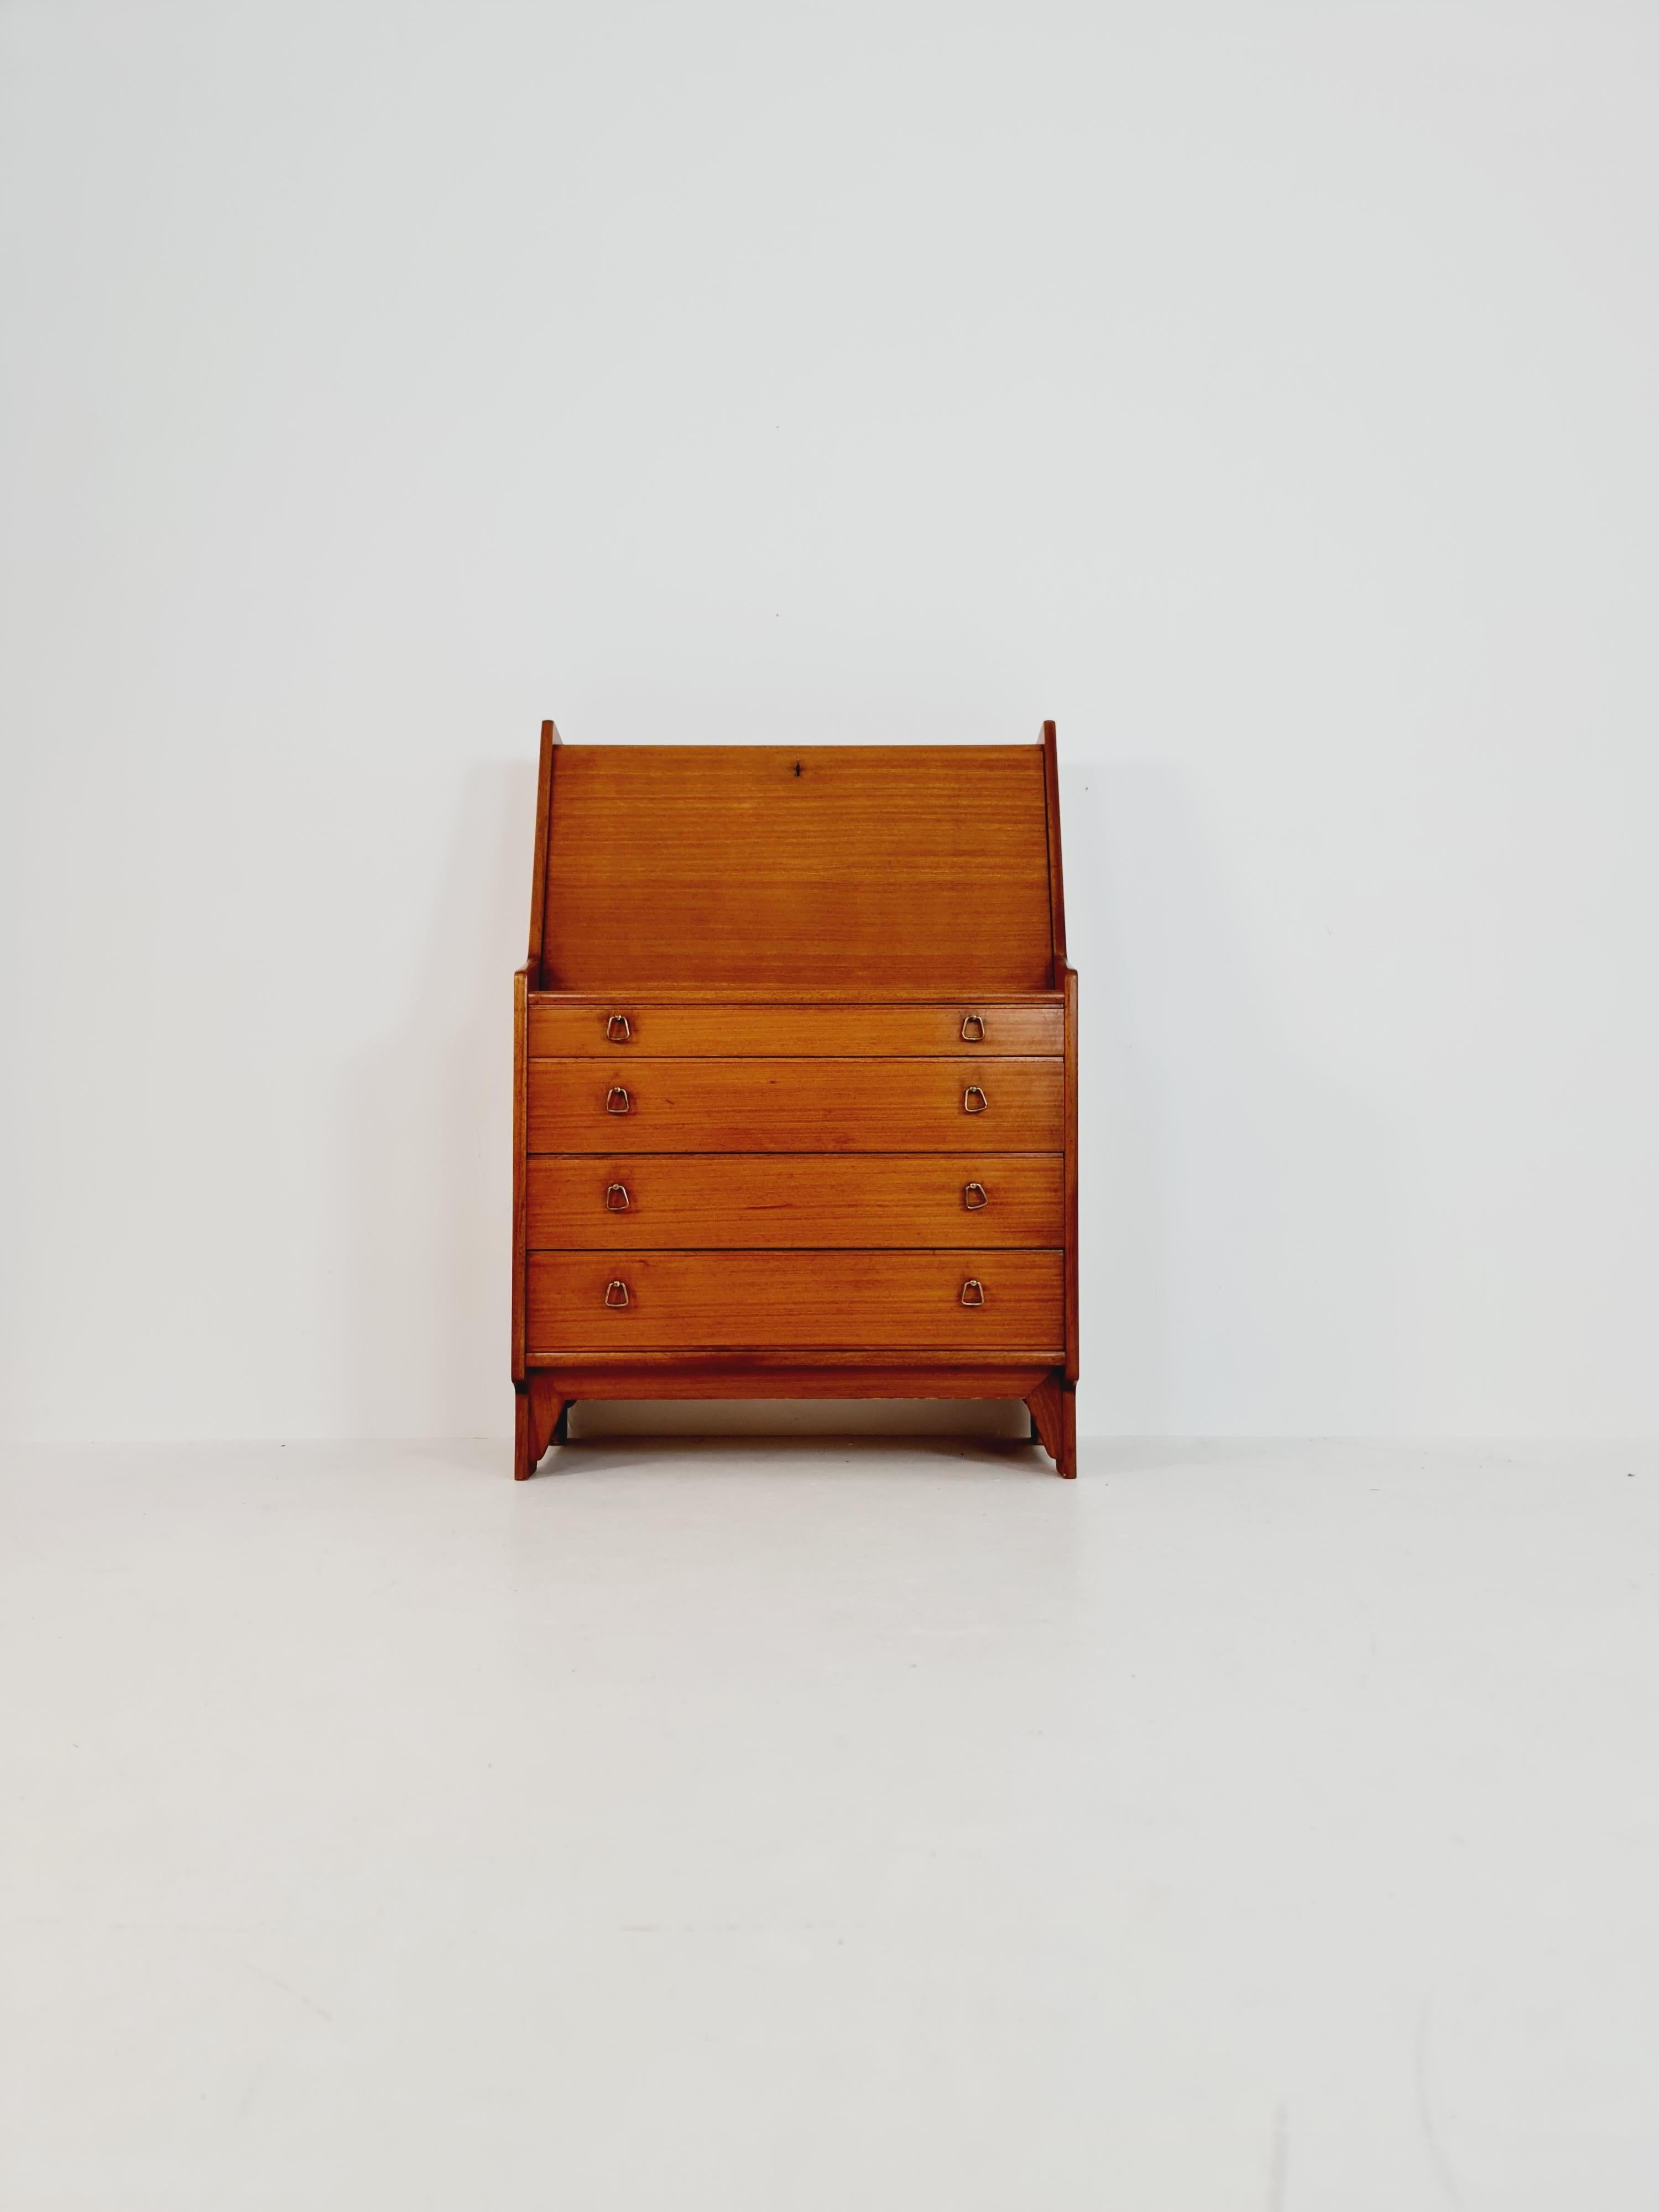 Mid century Scandinavian Secretary with drawers mahagony by Gjövik Möbler, Norway, 1960s

Design year: 1960s

Dimensions: : 44 D x 86 W x 133 H cm
Writing area extends: 45  x 82  cm

It is in good vintage condition, however, as with all vintage